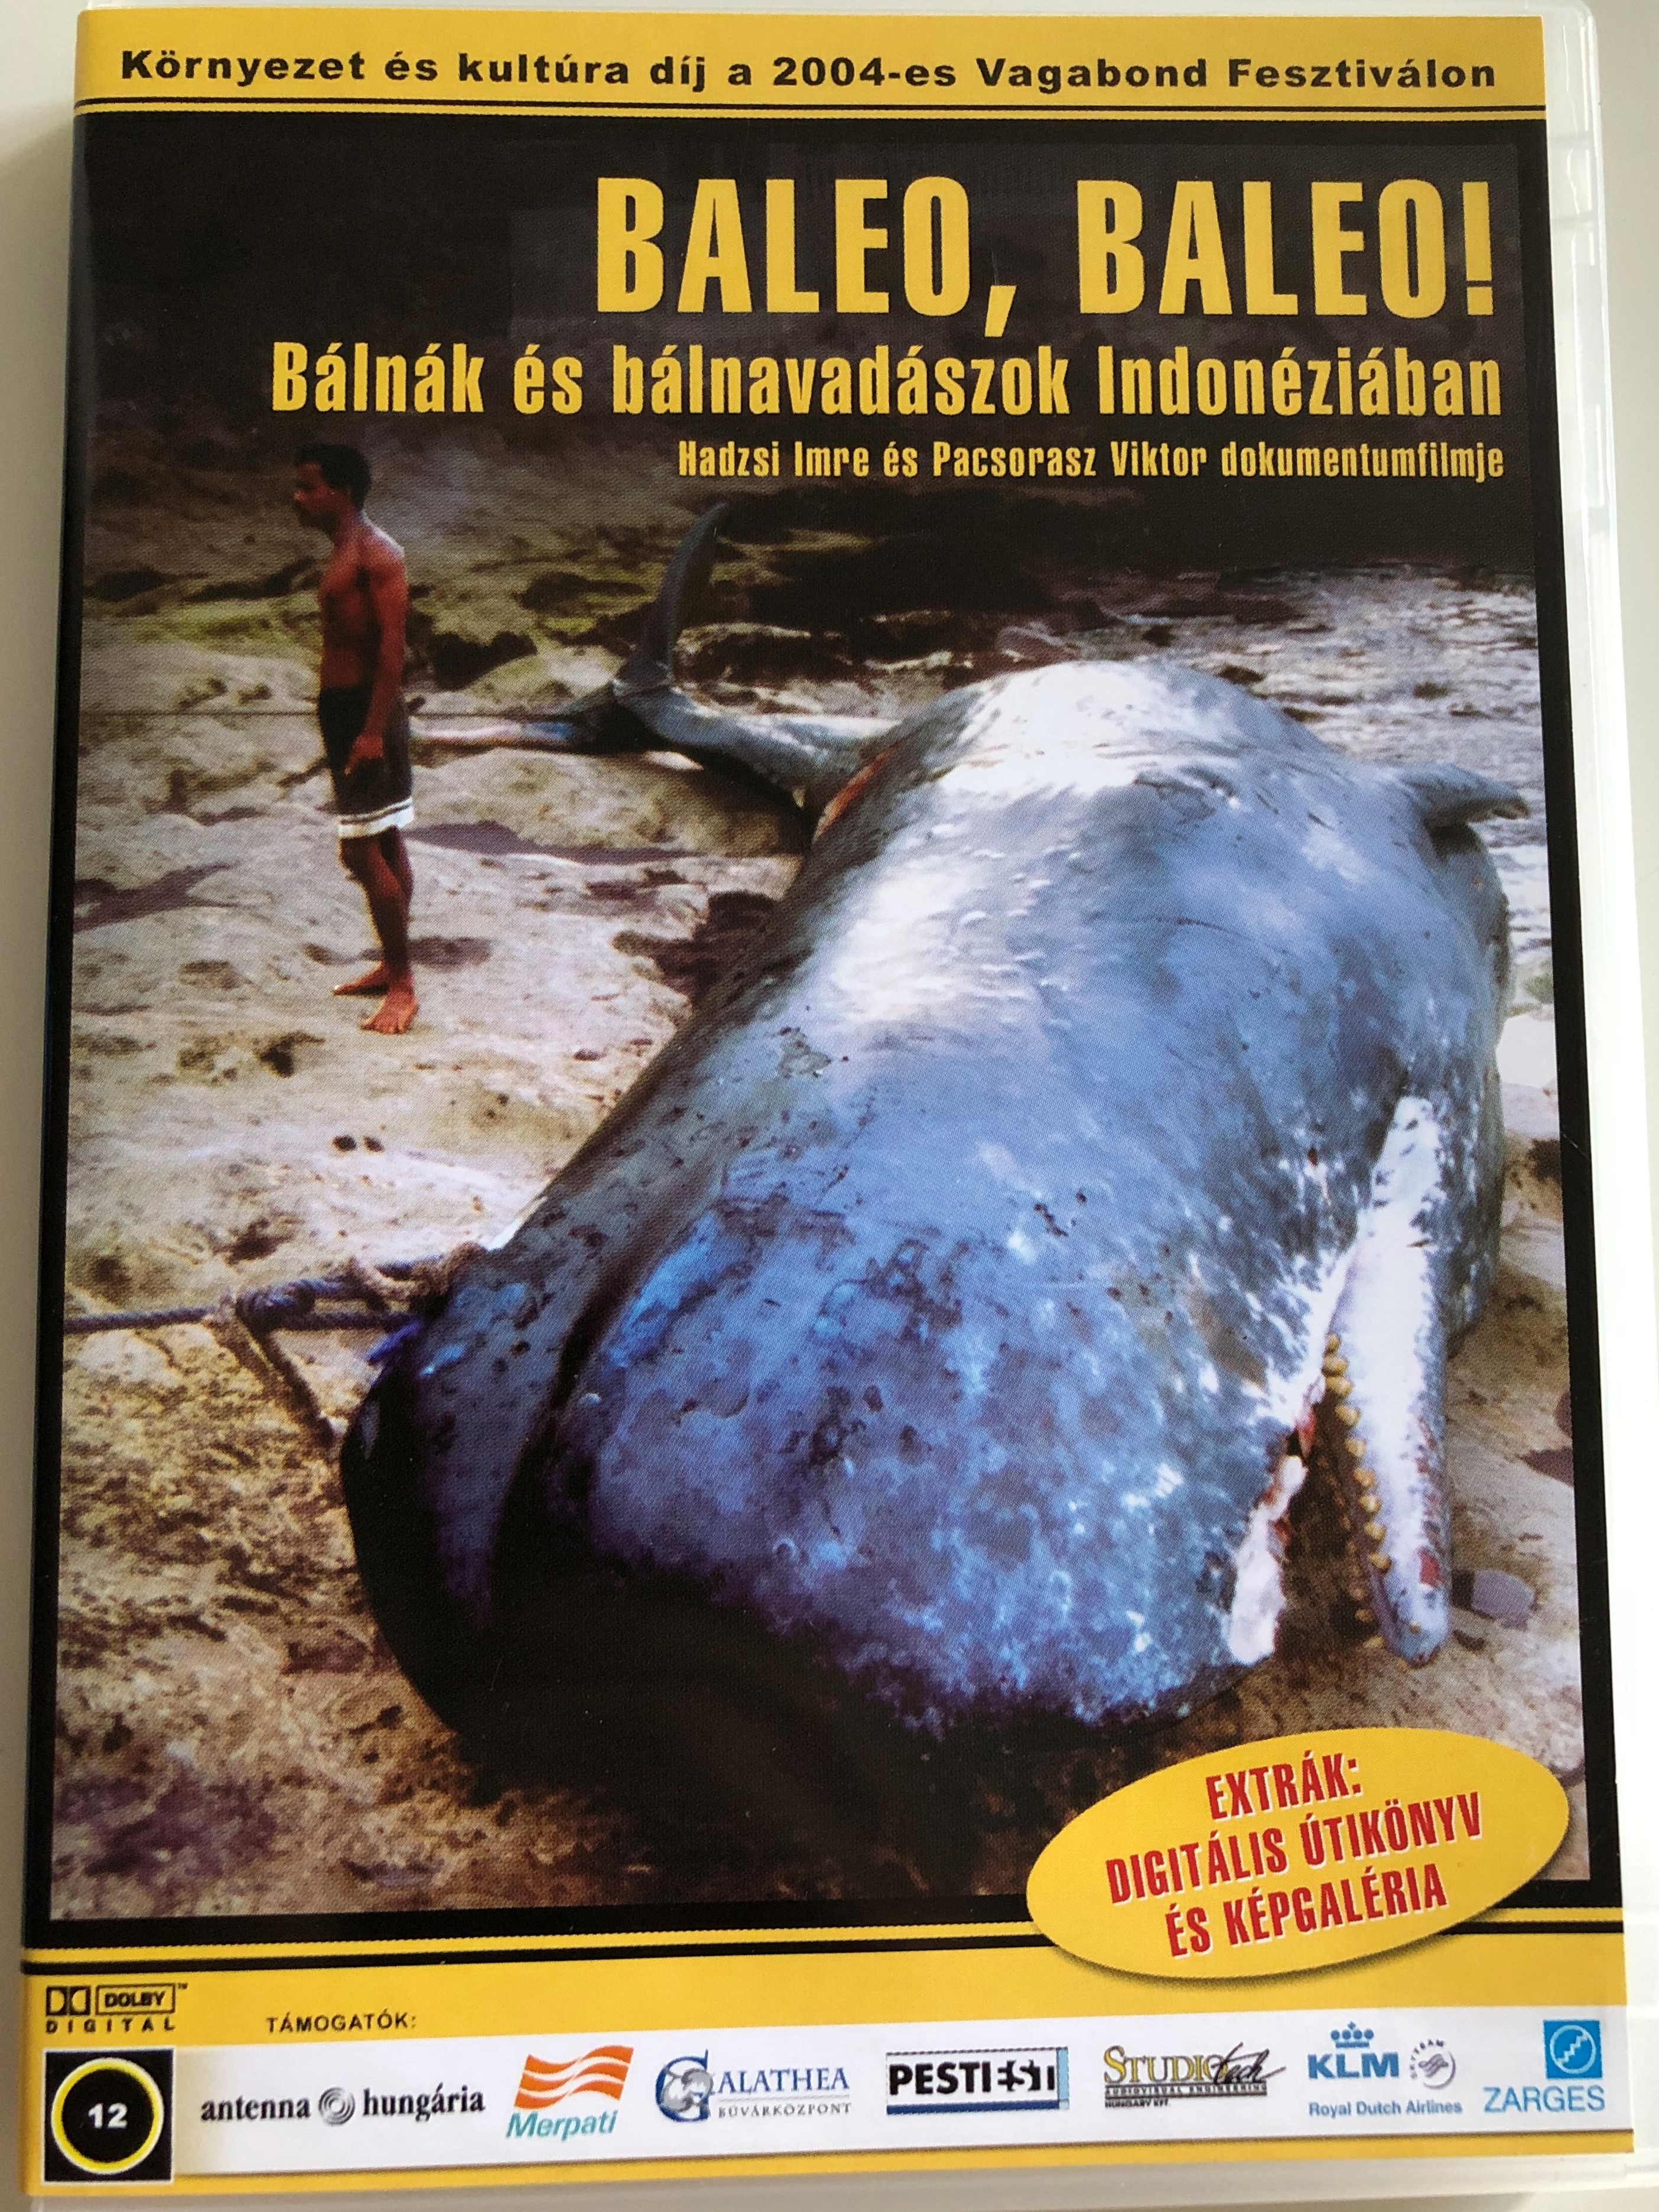 baleo-baleo-whales-and-whale-hunters-in-indonesia-dvd-2005-baleo-baleo-b-ln-k-s-b-lnavad-szok-indon-zi-ban-directed-by-hadzsi-imre-pacsorasz-viktor-documentary-about-the-disappearing-culture-of-traditional-whale-hunte-1-.jpg